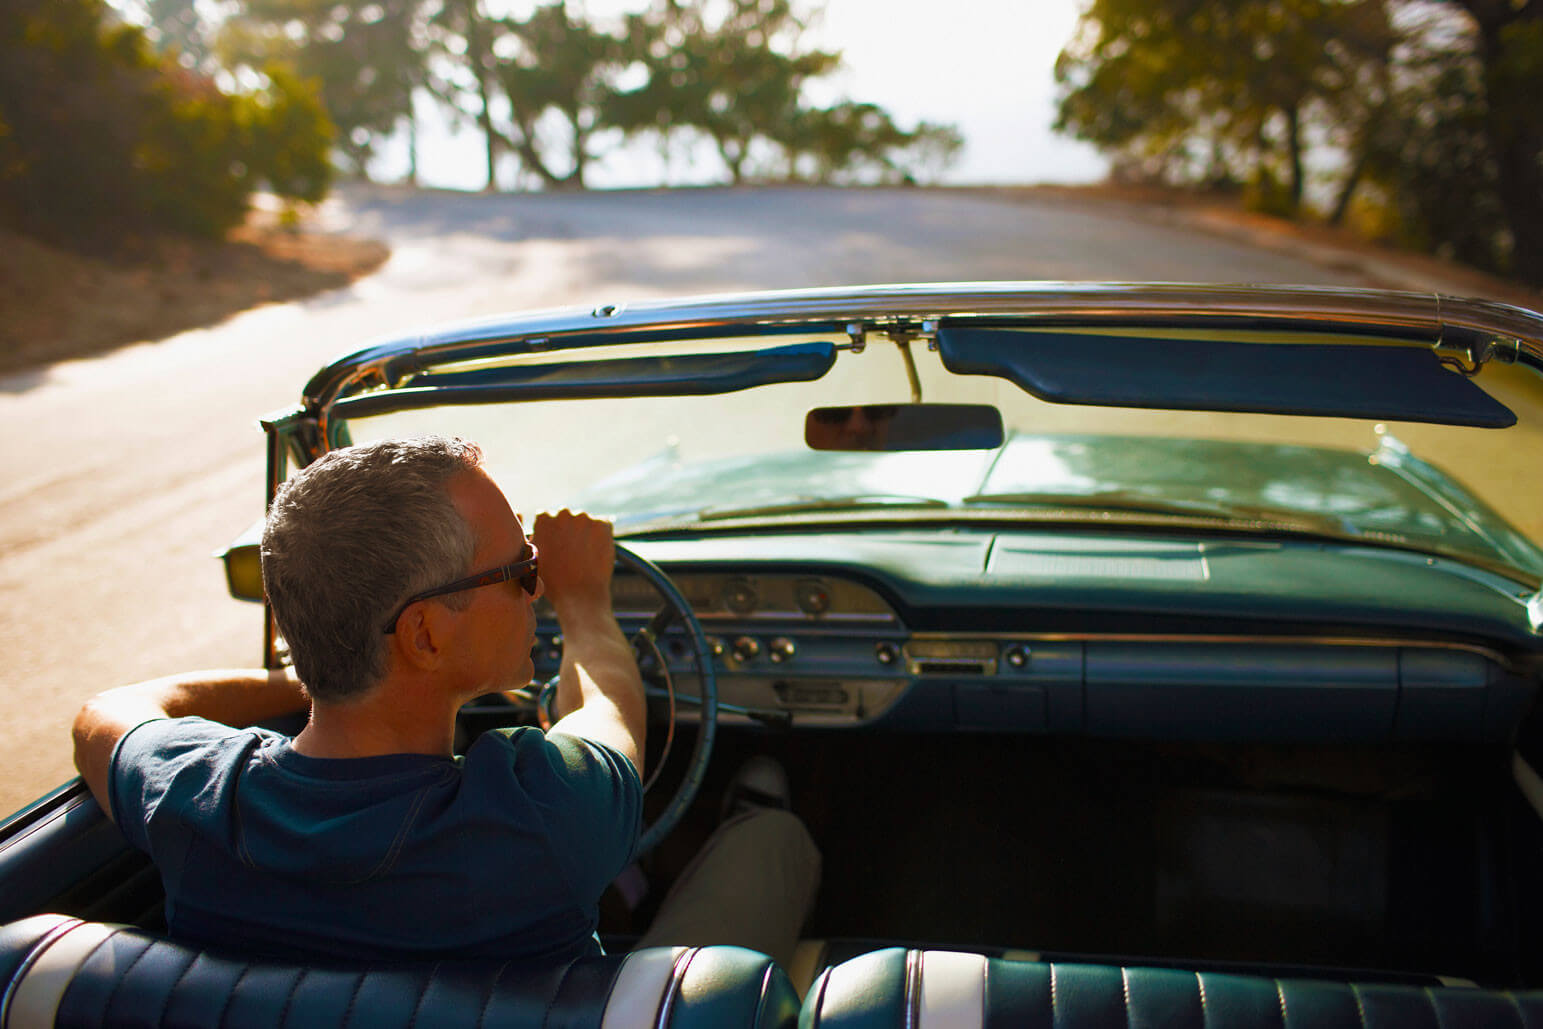 7 Steps to Get Your Classic Car Ready for Spring